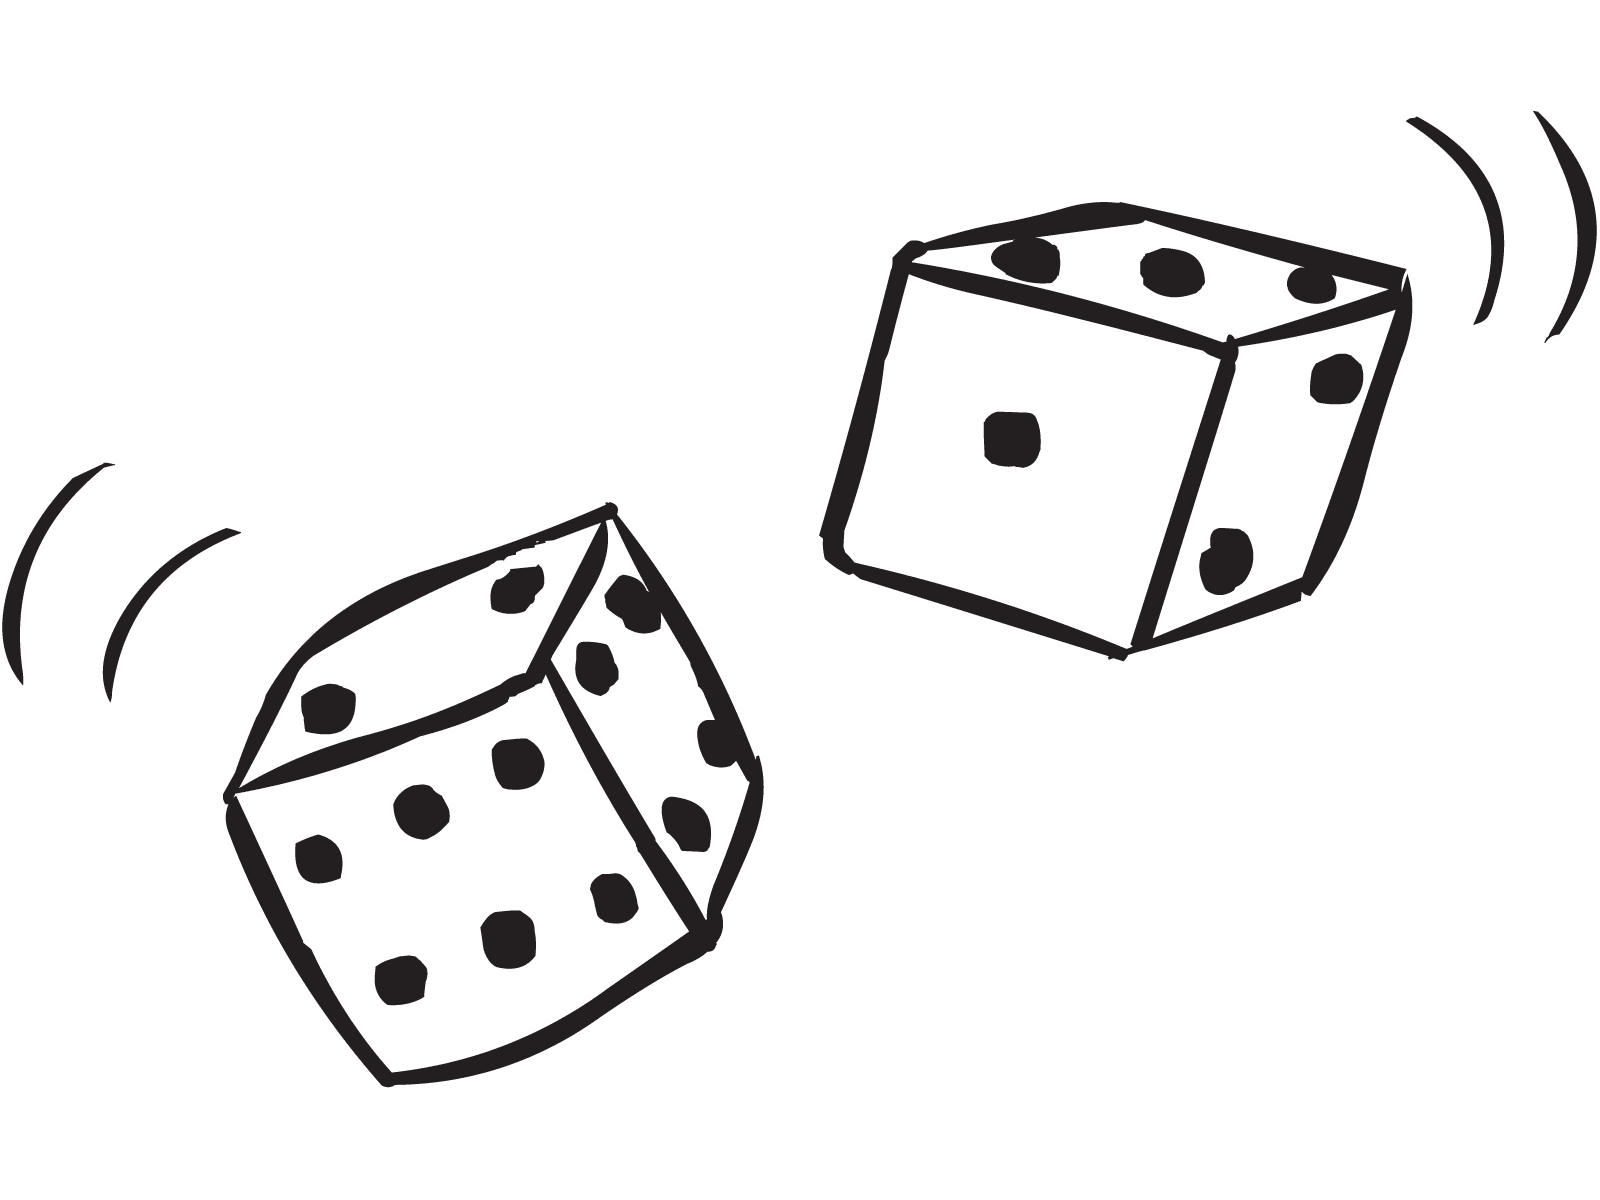 Pair of dice being rolled in Double Dice Game.